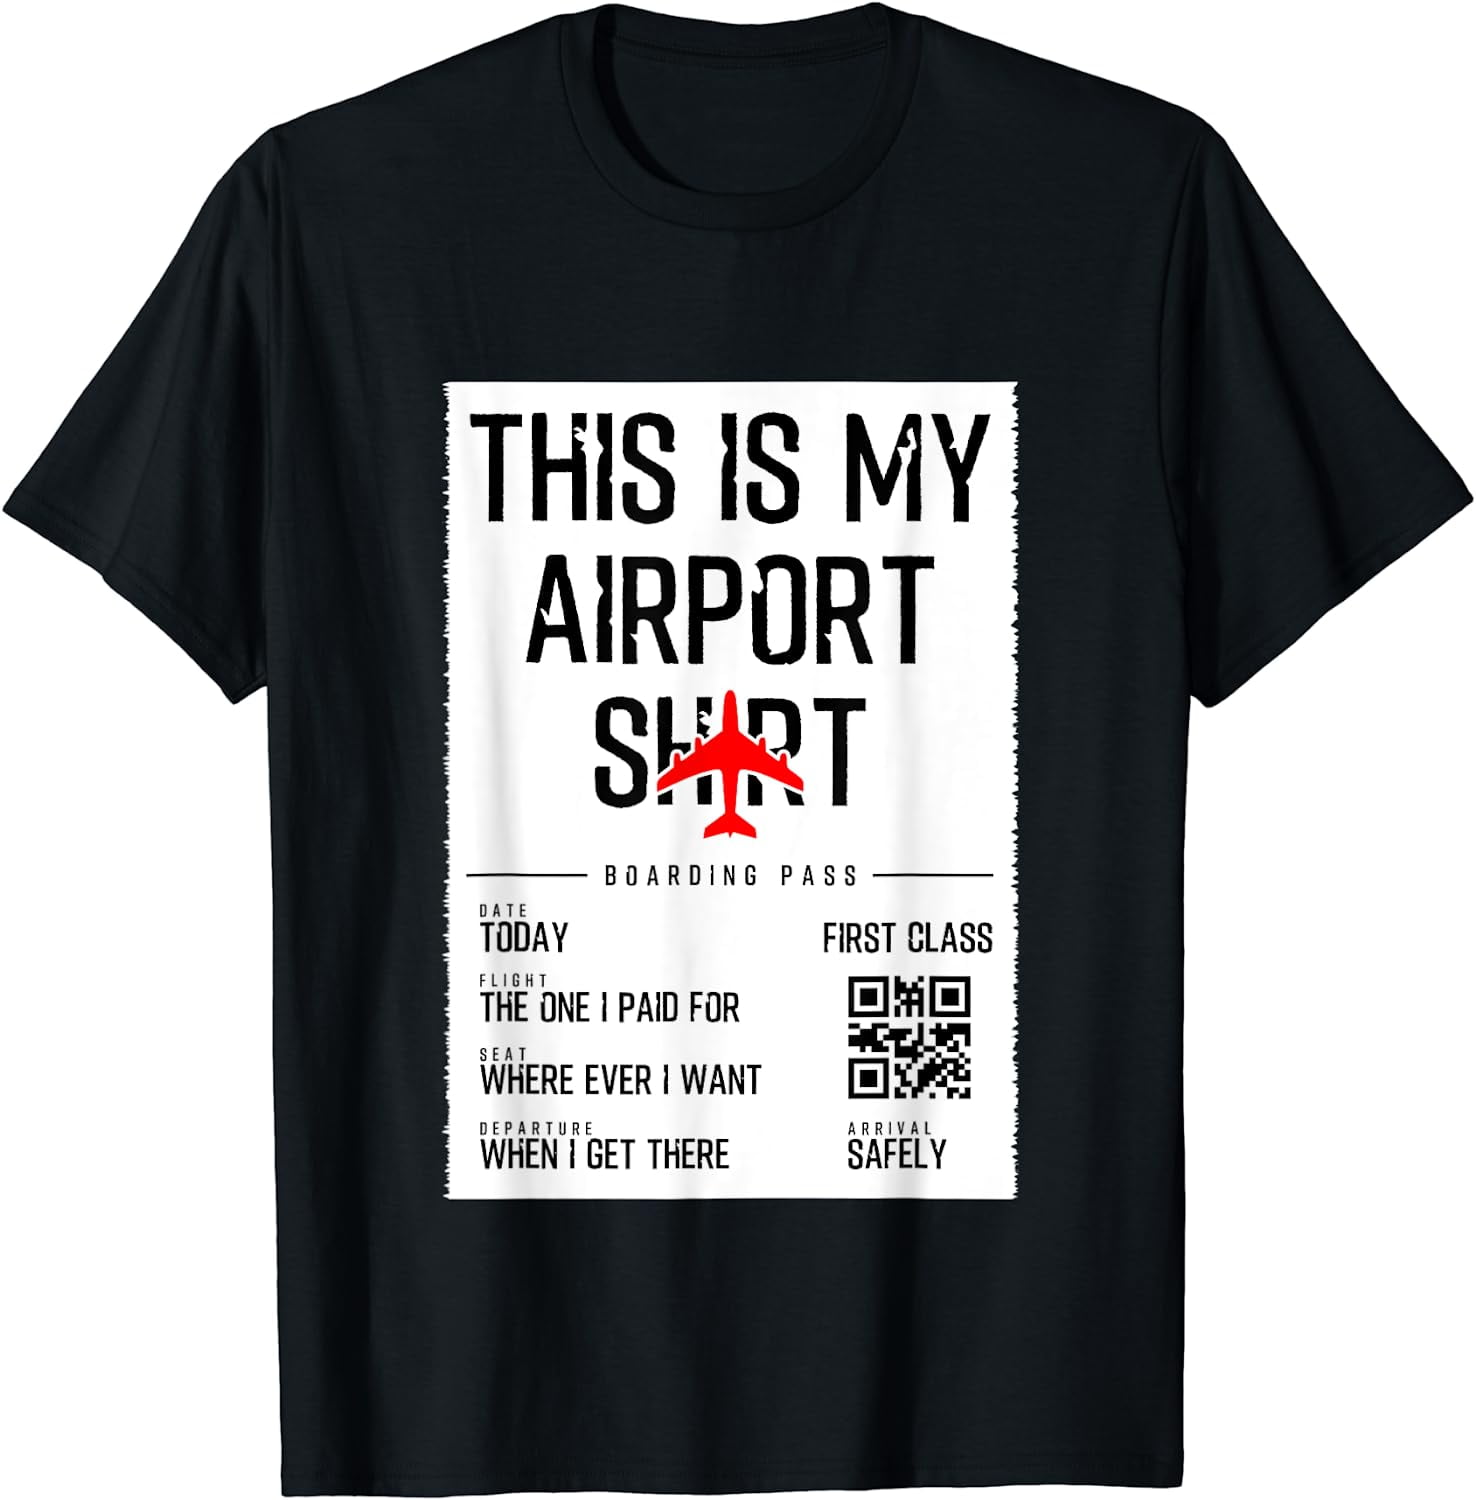 This Is My Airport Shirt Family Travel Women T-Shirt Black Large ...